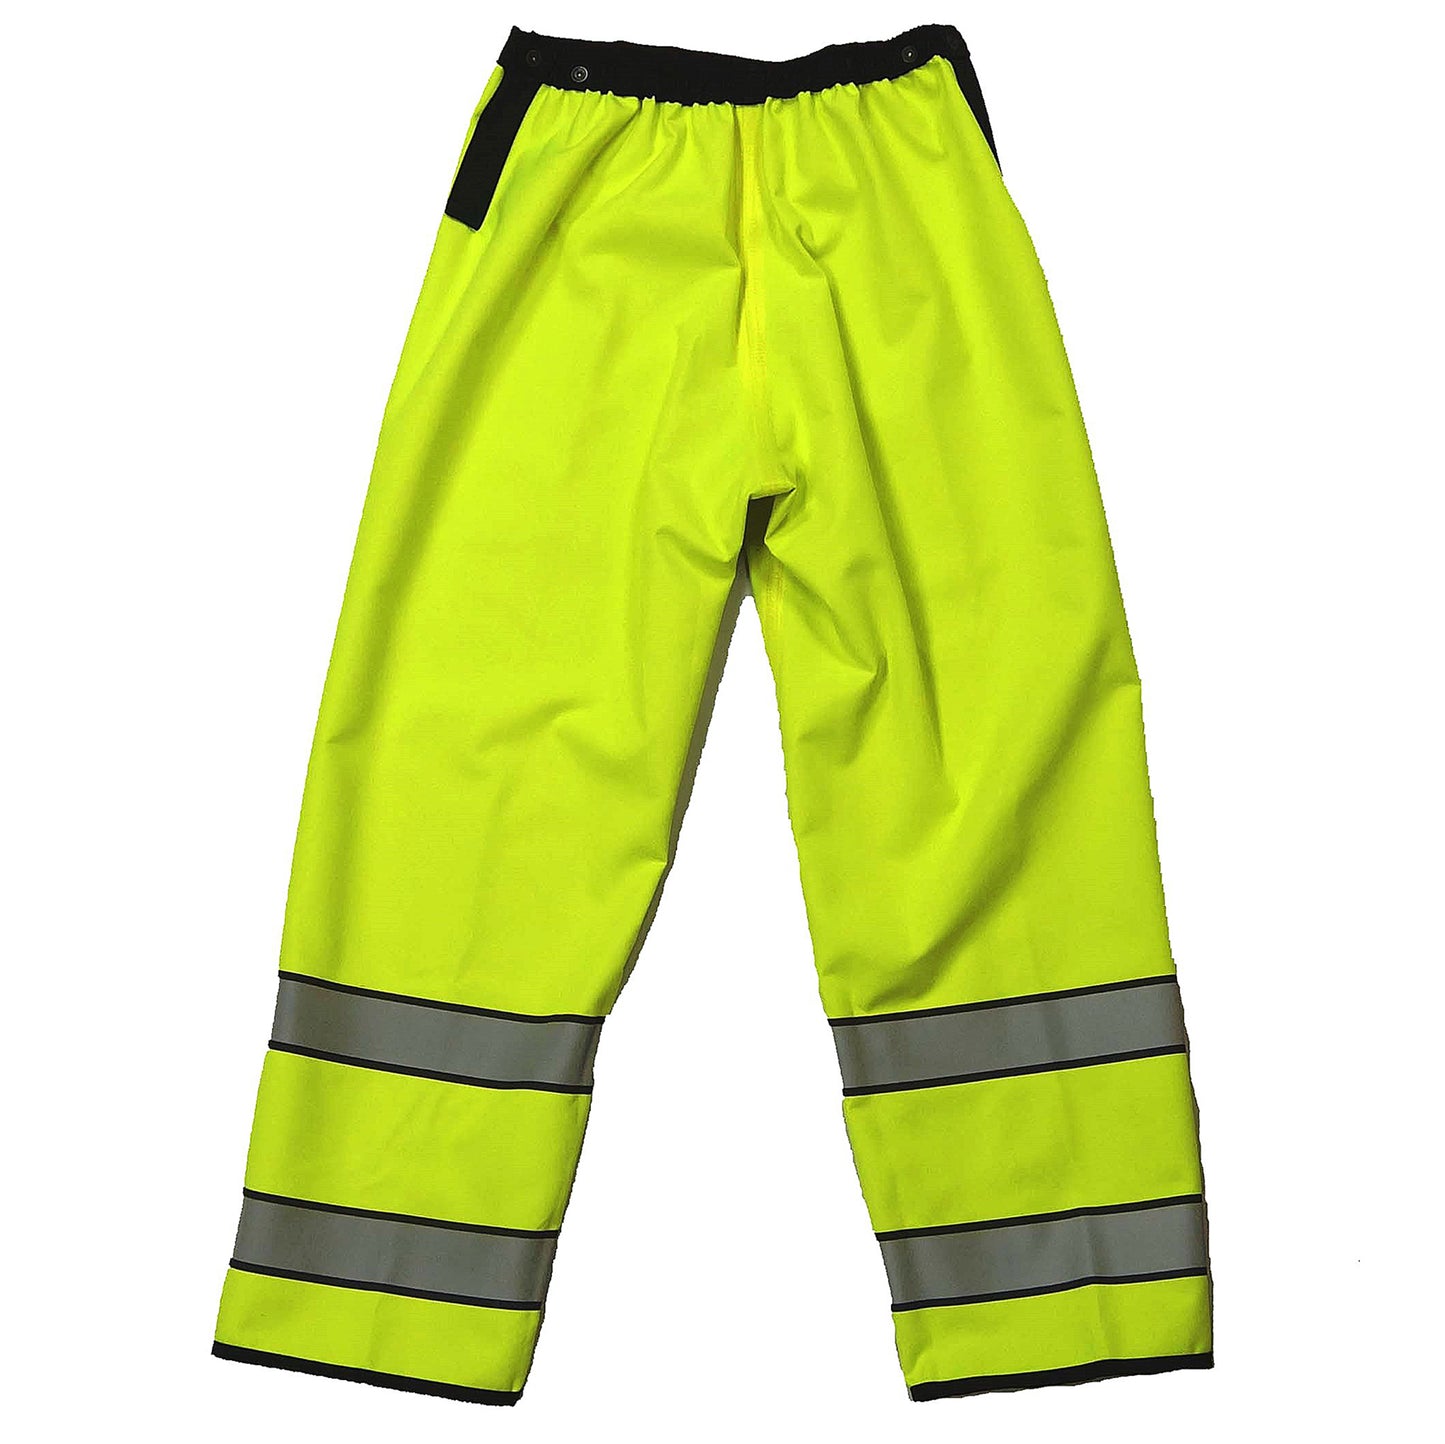 Neese Reversible 5010 Series Police Trouser with 3M Reflective Taping